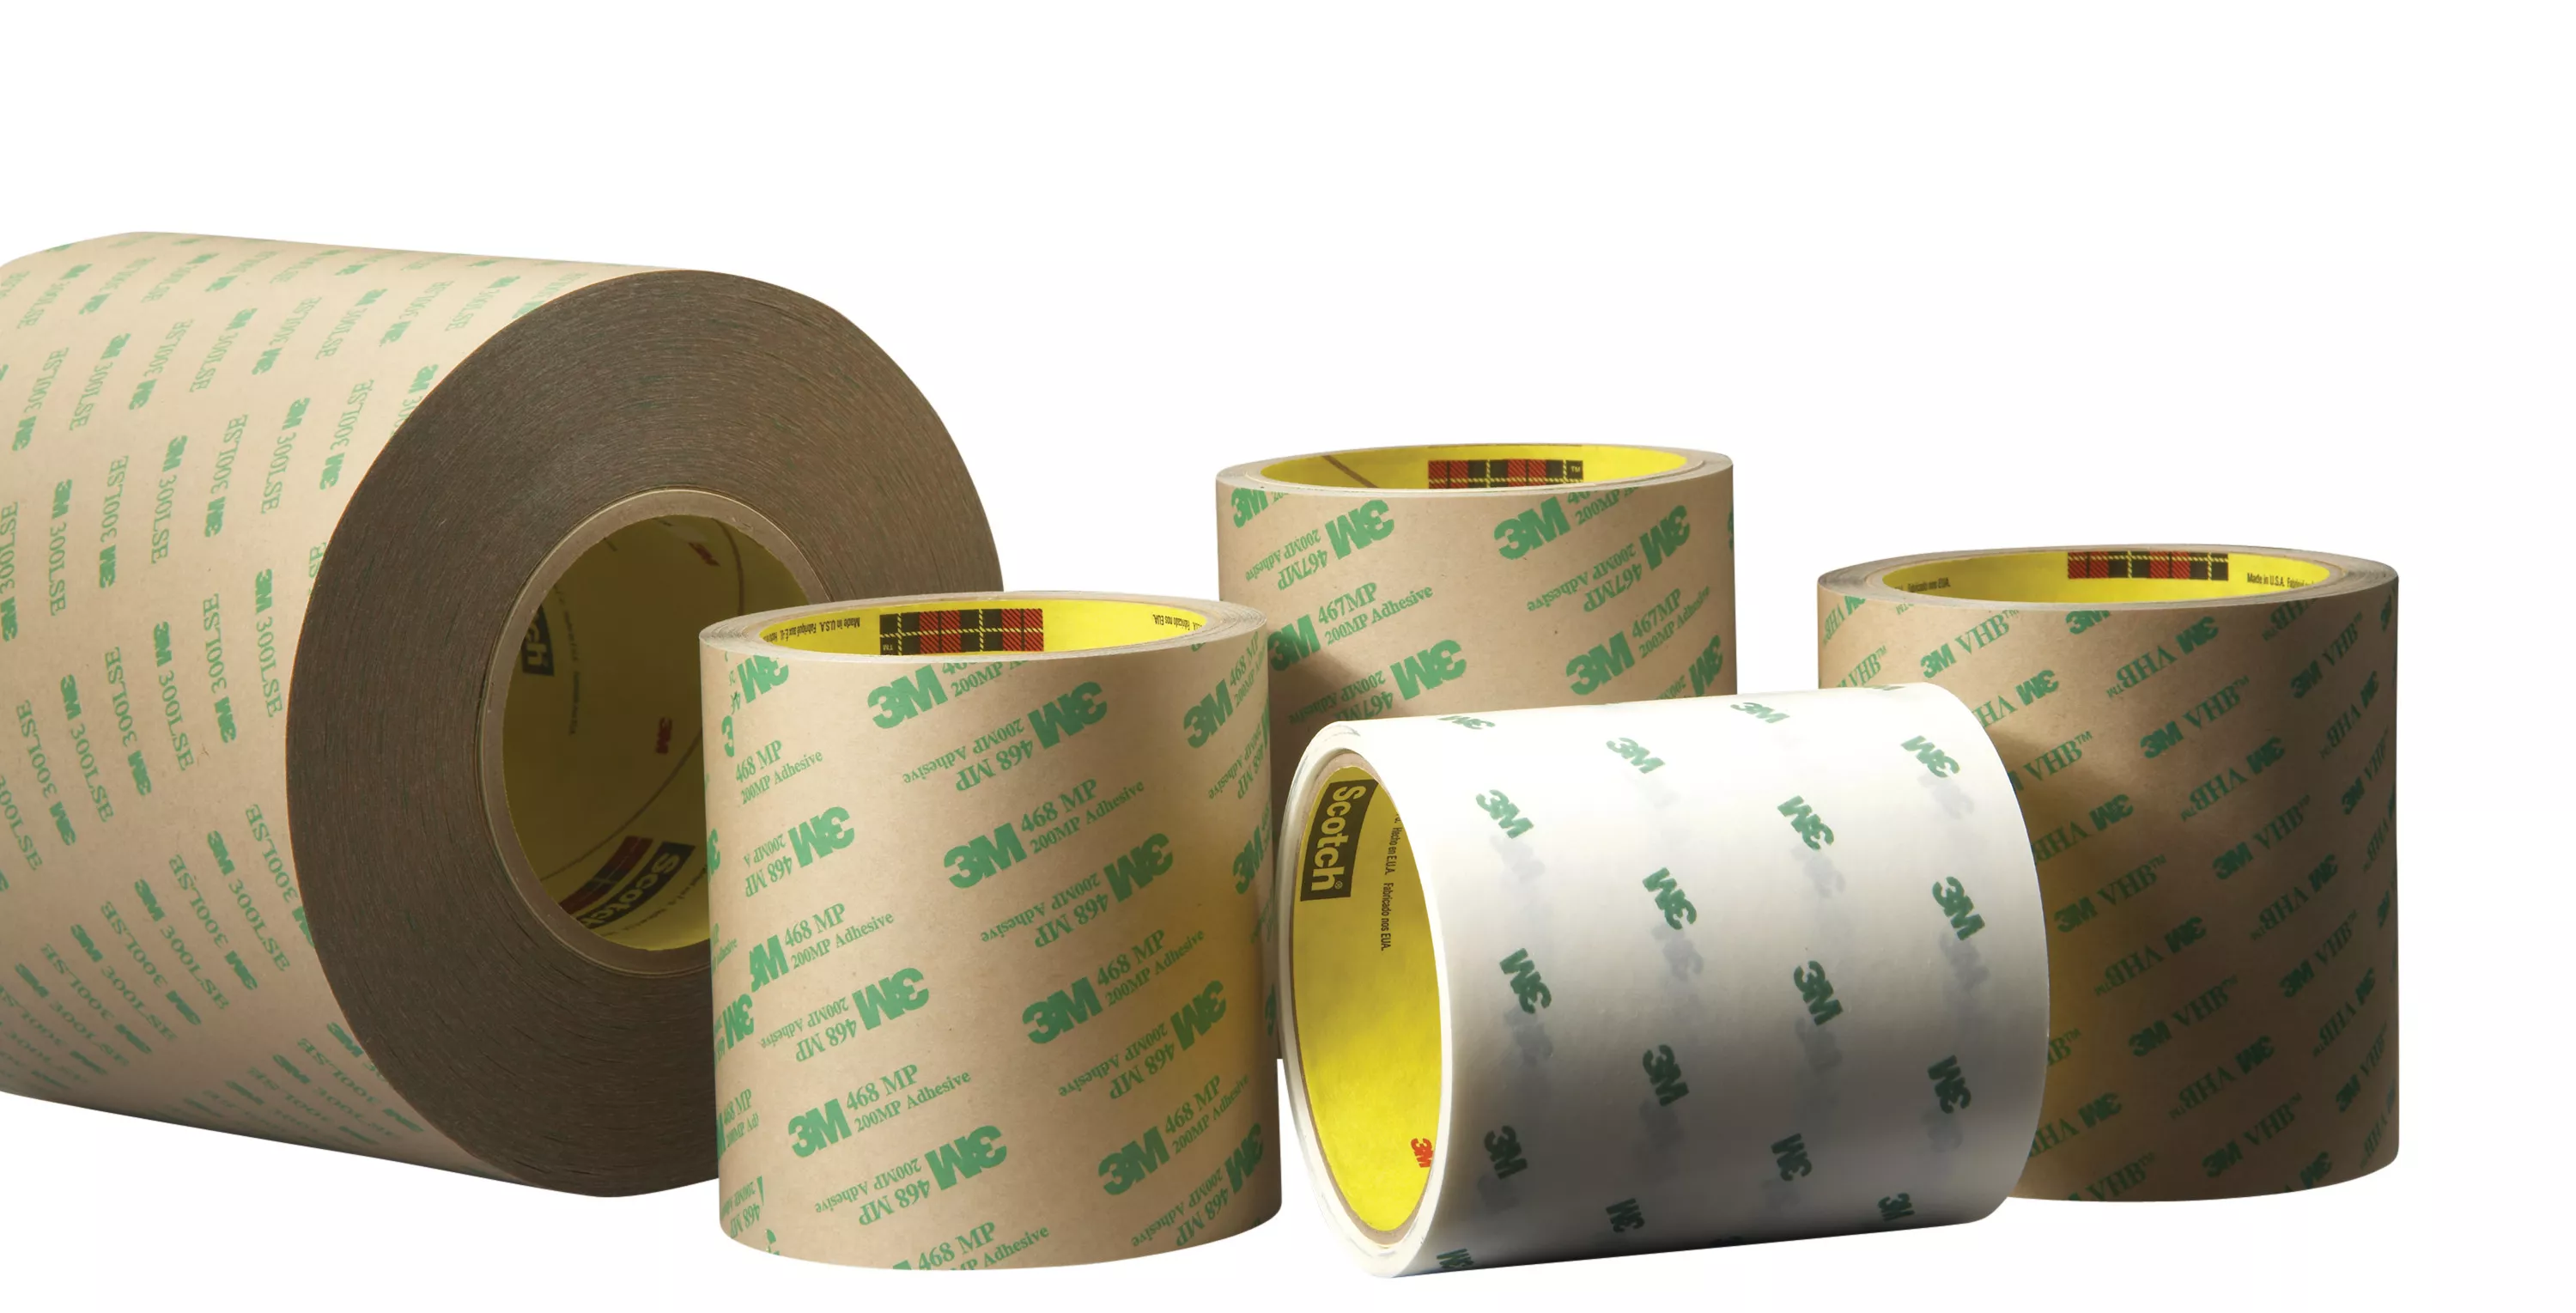 3M™ Adhesive Transfer Tape 9466B, White, 5.25 in x 360 yd, 3.5 mil, 1
Roll/Case, Restricted